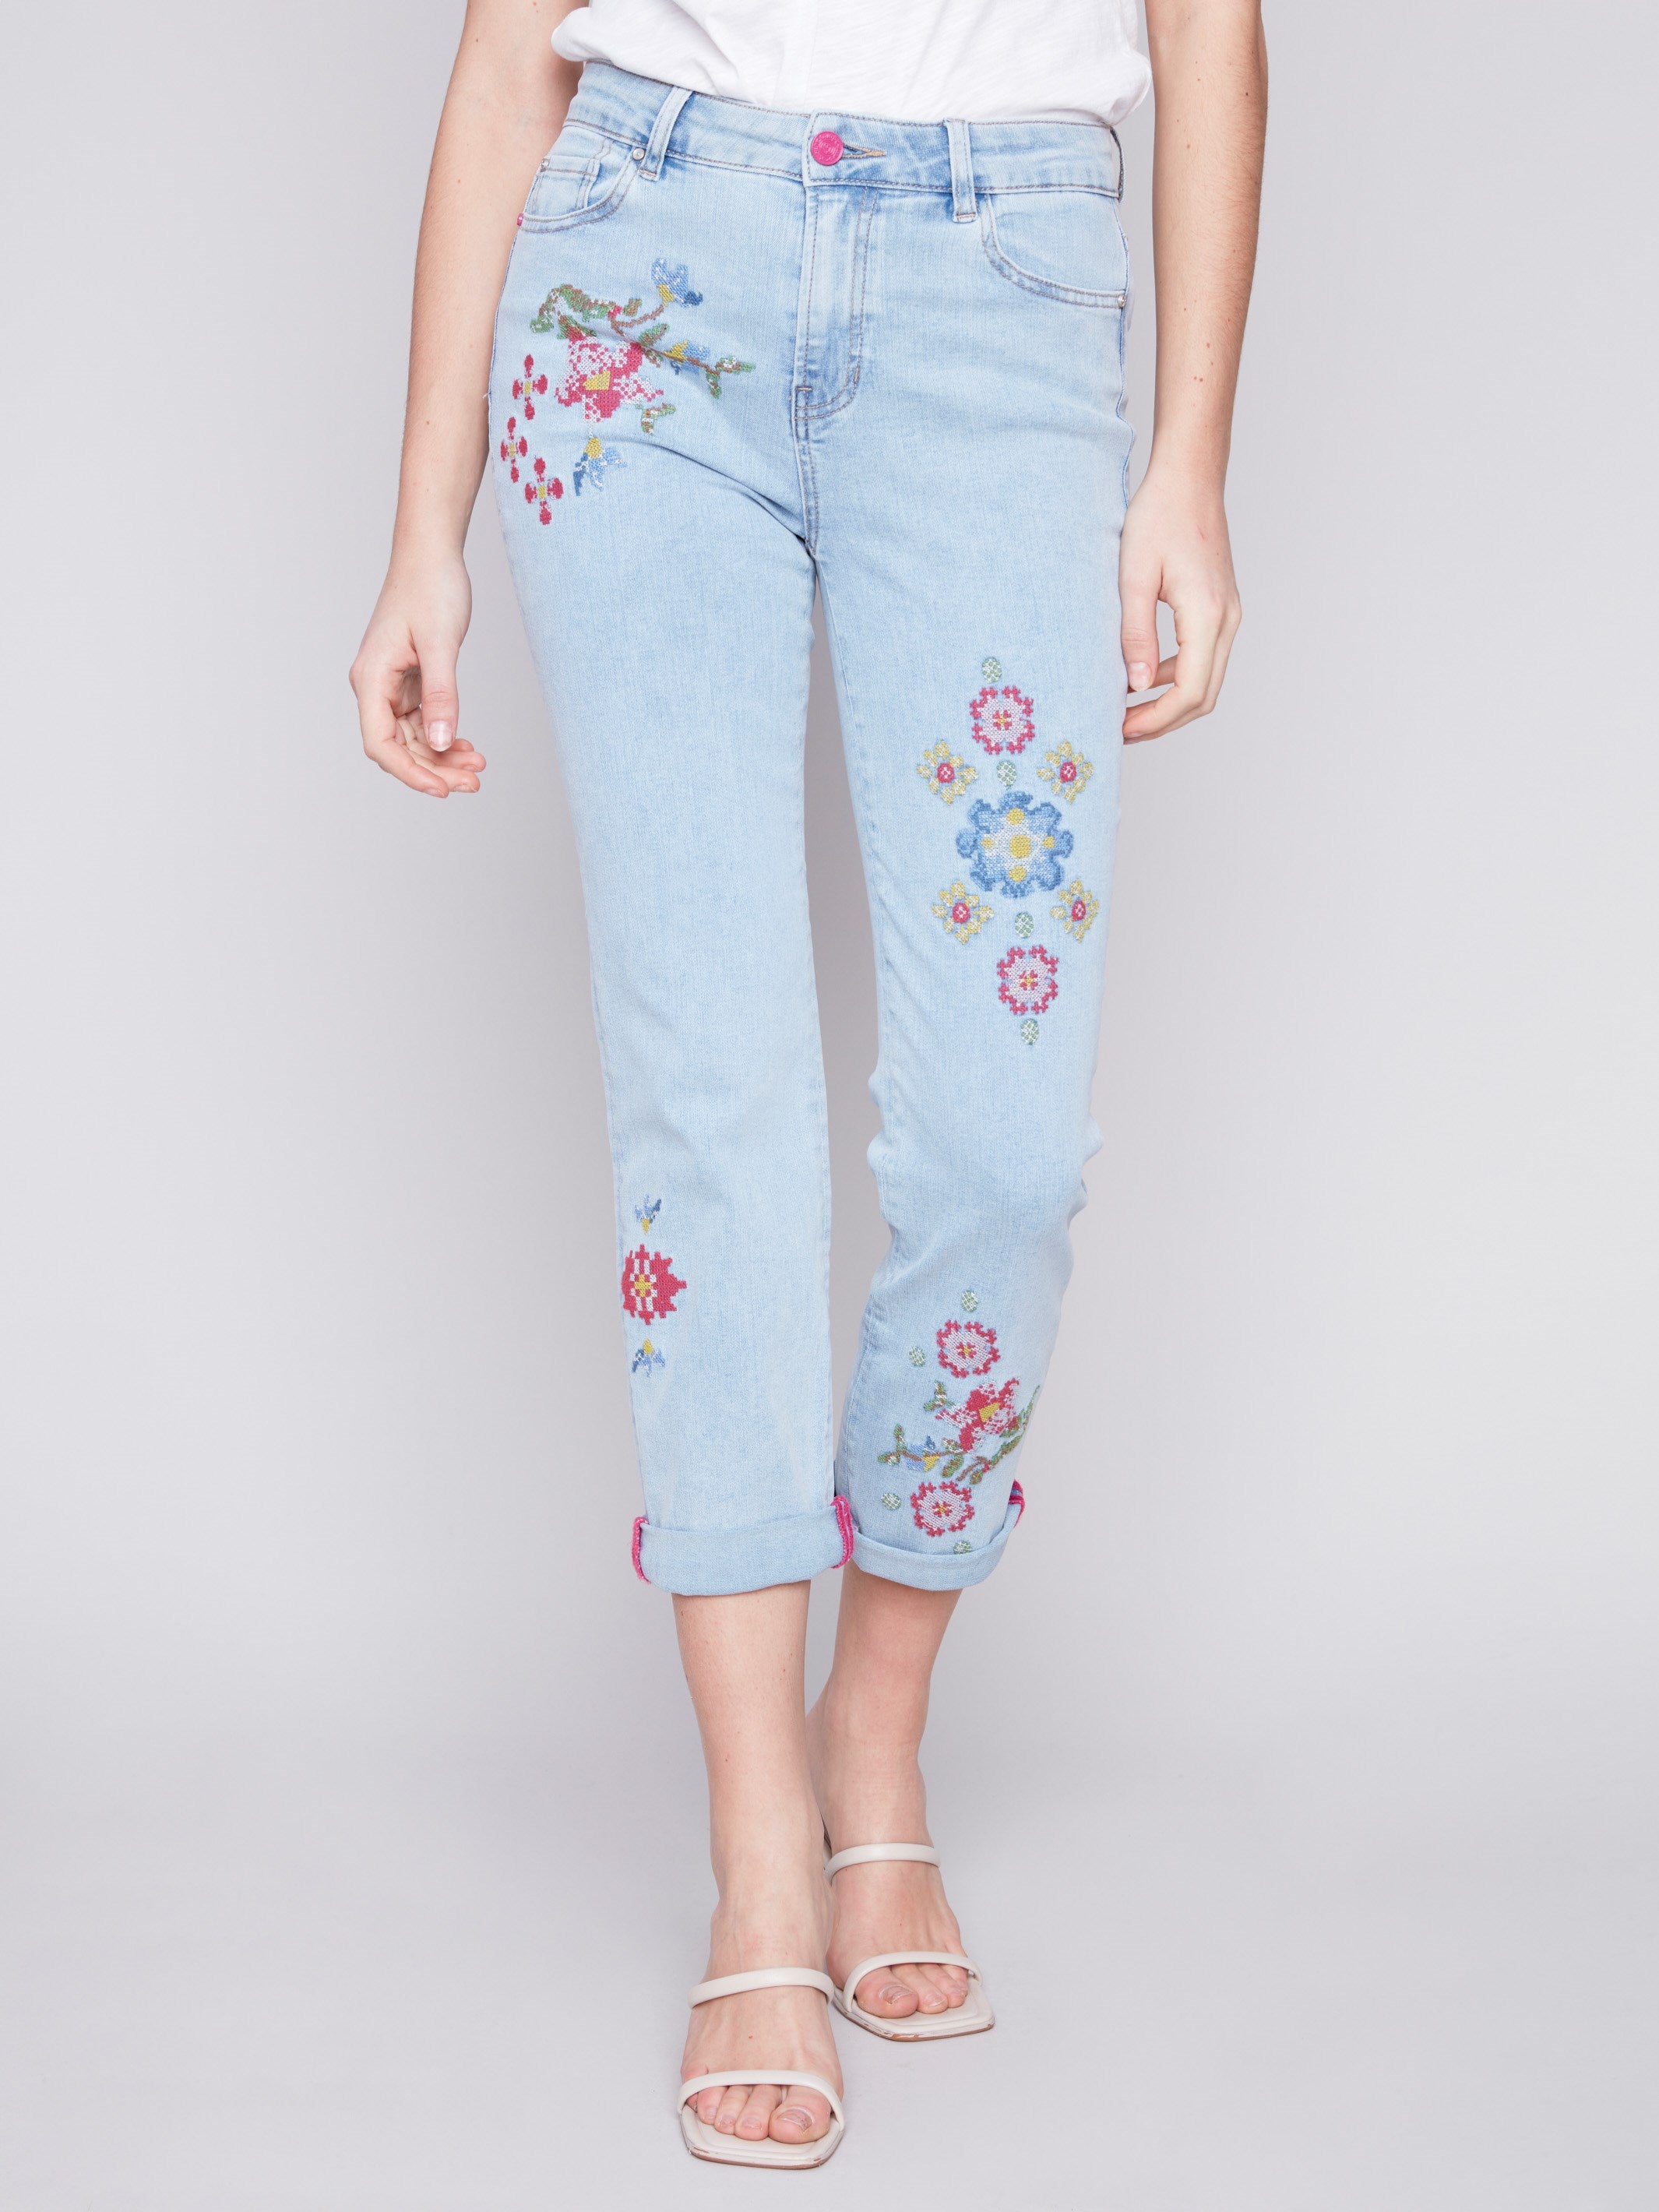 Charlie B Cross Stitch Embroidered Jeans - Bleach Blue - Image 2